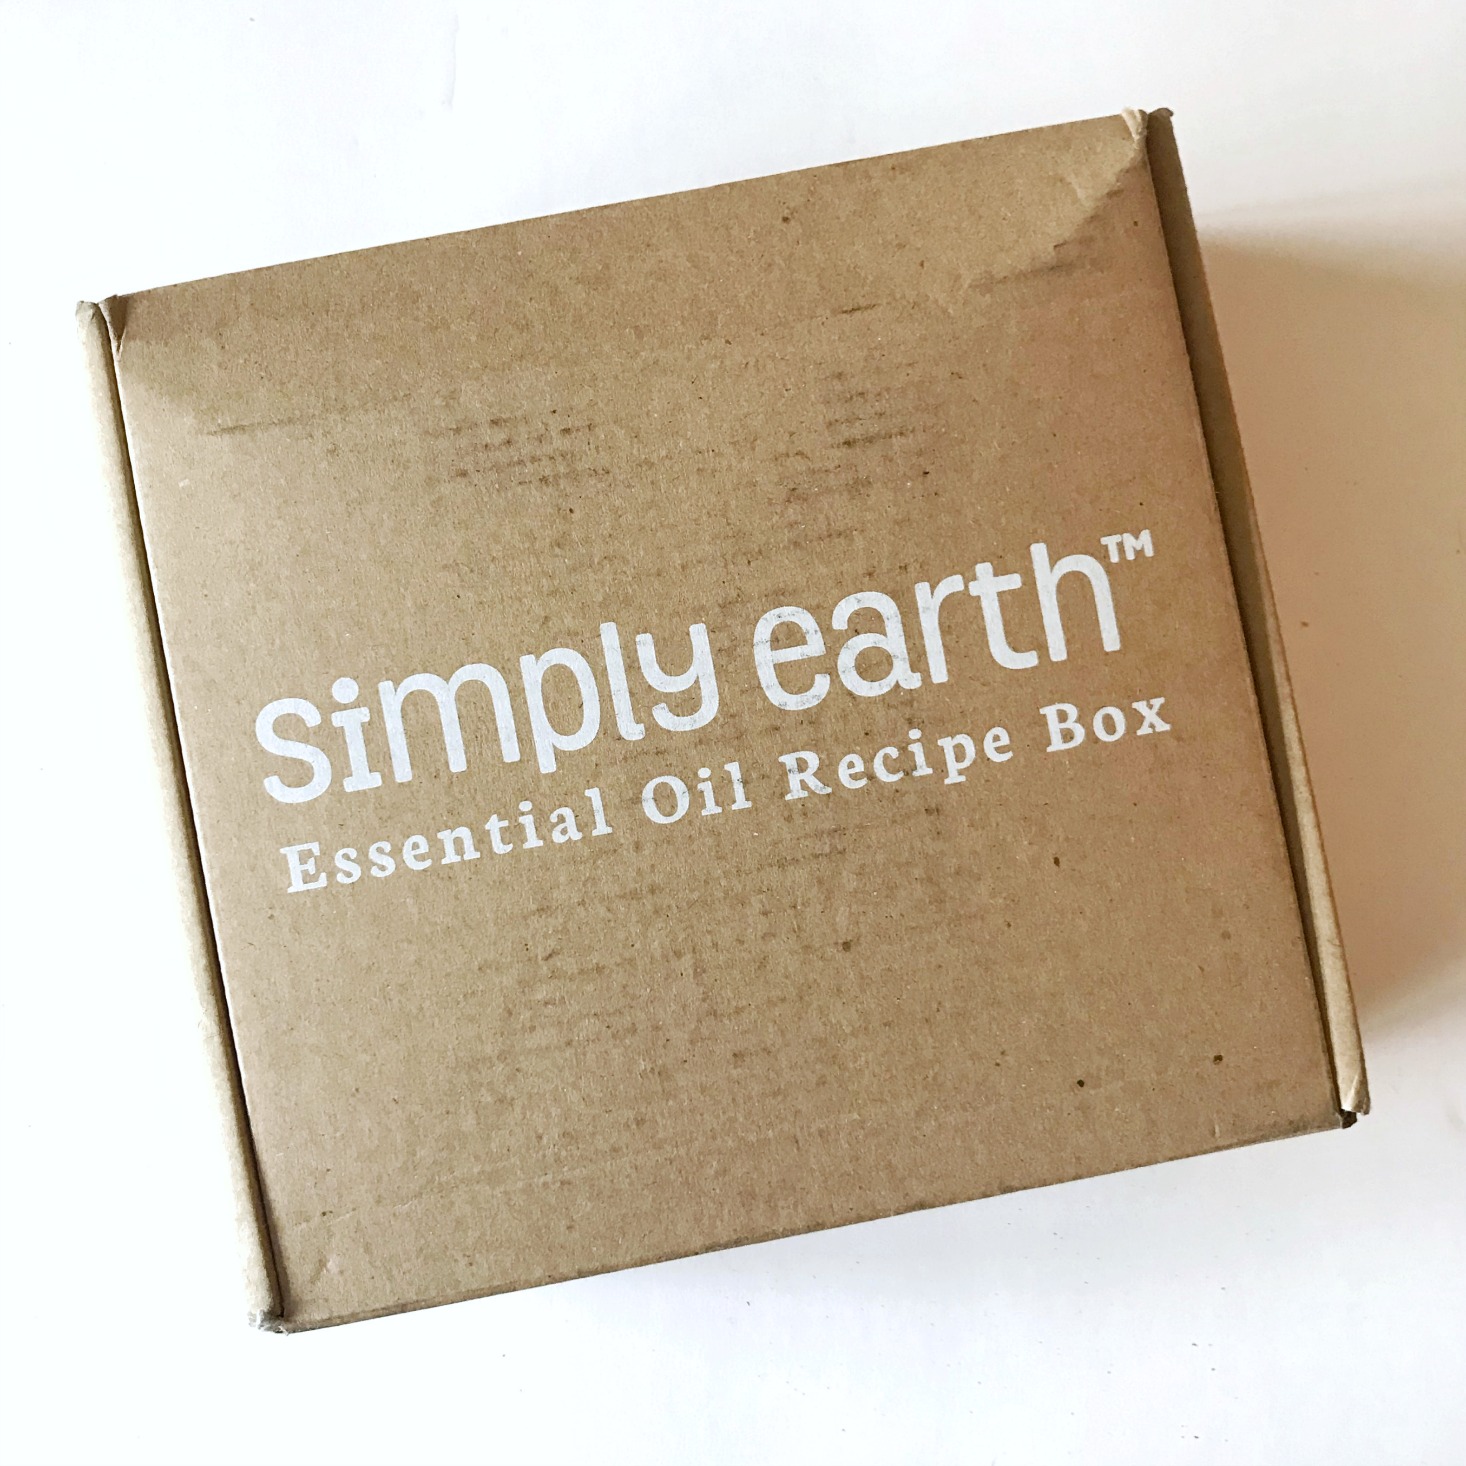 Simply Earth Essential Oil Recipe Box Review + Coupon – June 2018